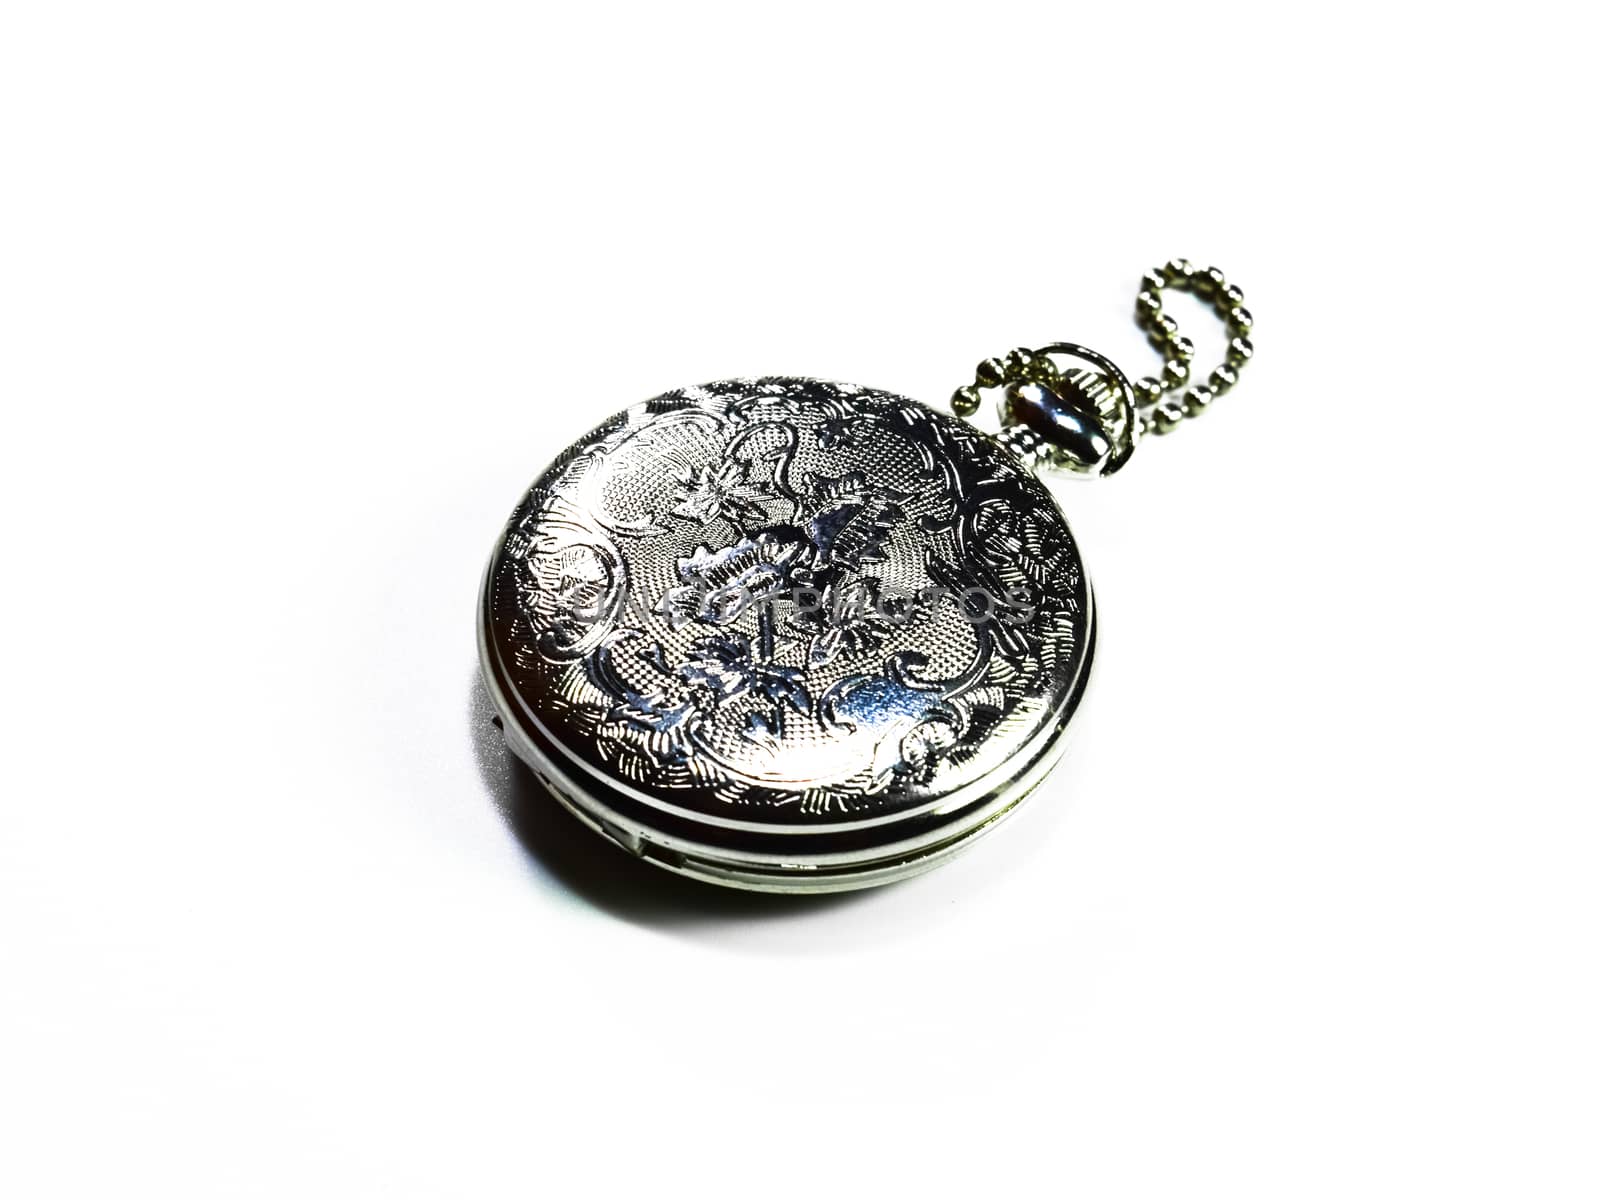 Steel pocket watch, shiny, a stainless steel.